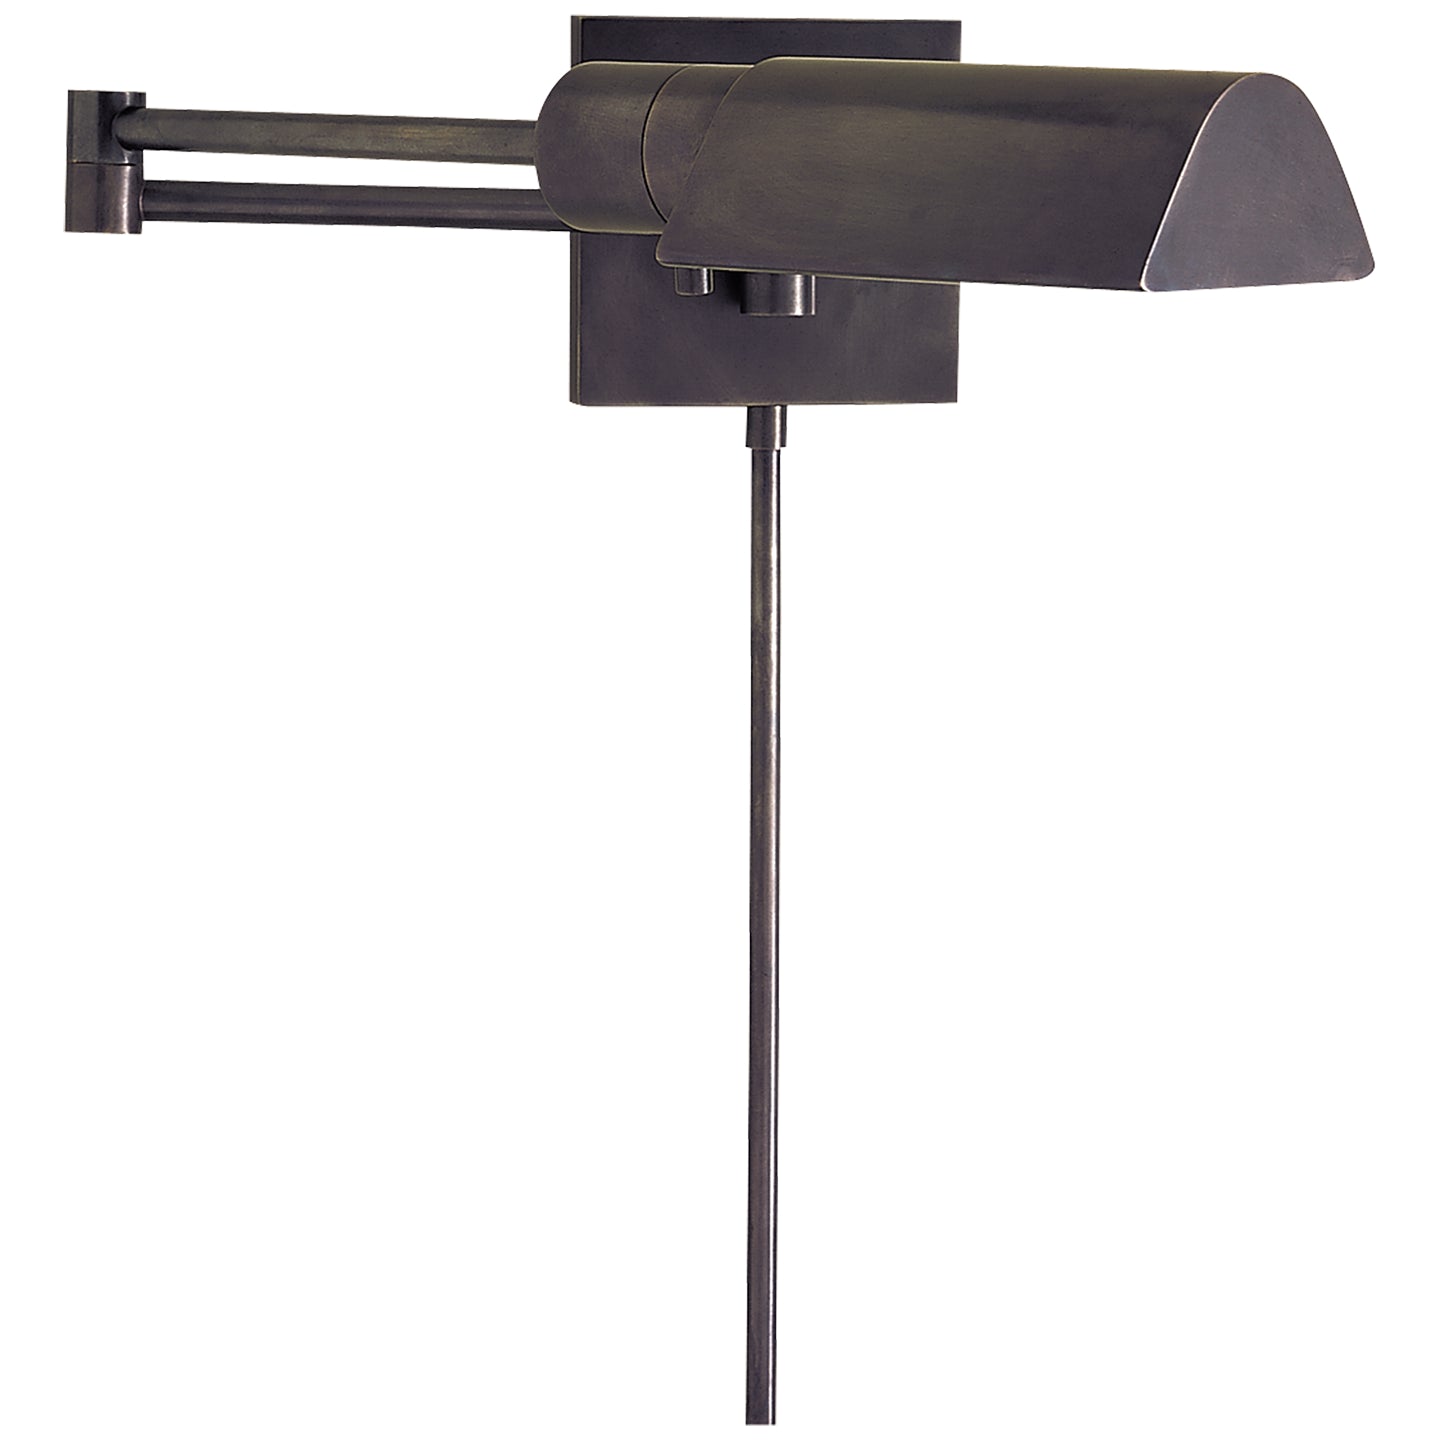 Load image into Gallery viewer, Visual Comfort Signature - 92025 BZ - One Light Swing Arm Wall Lamp - VC CLASSIC - Bronze
